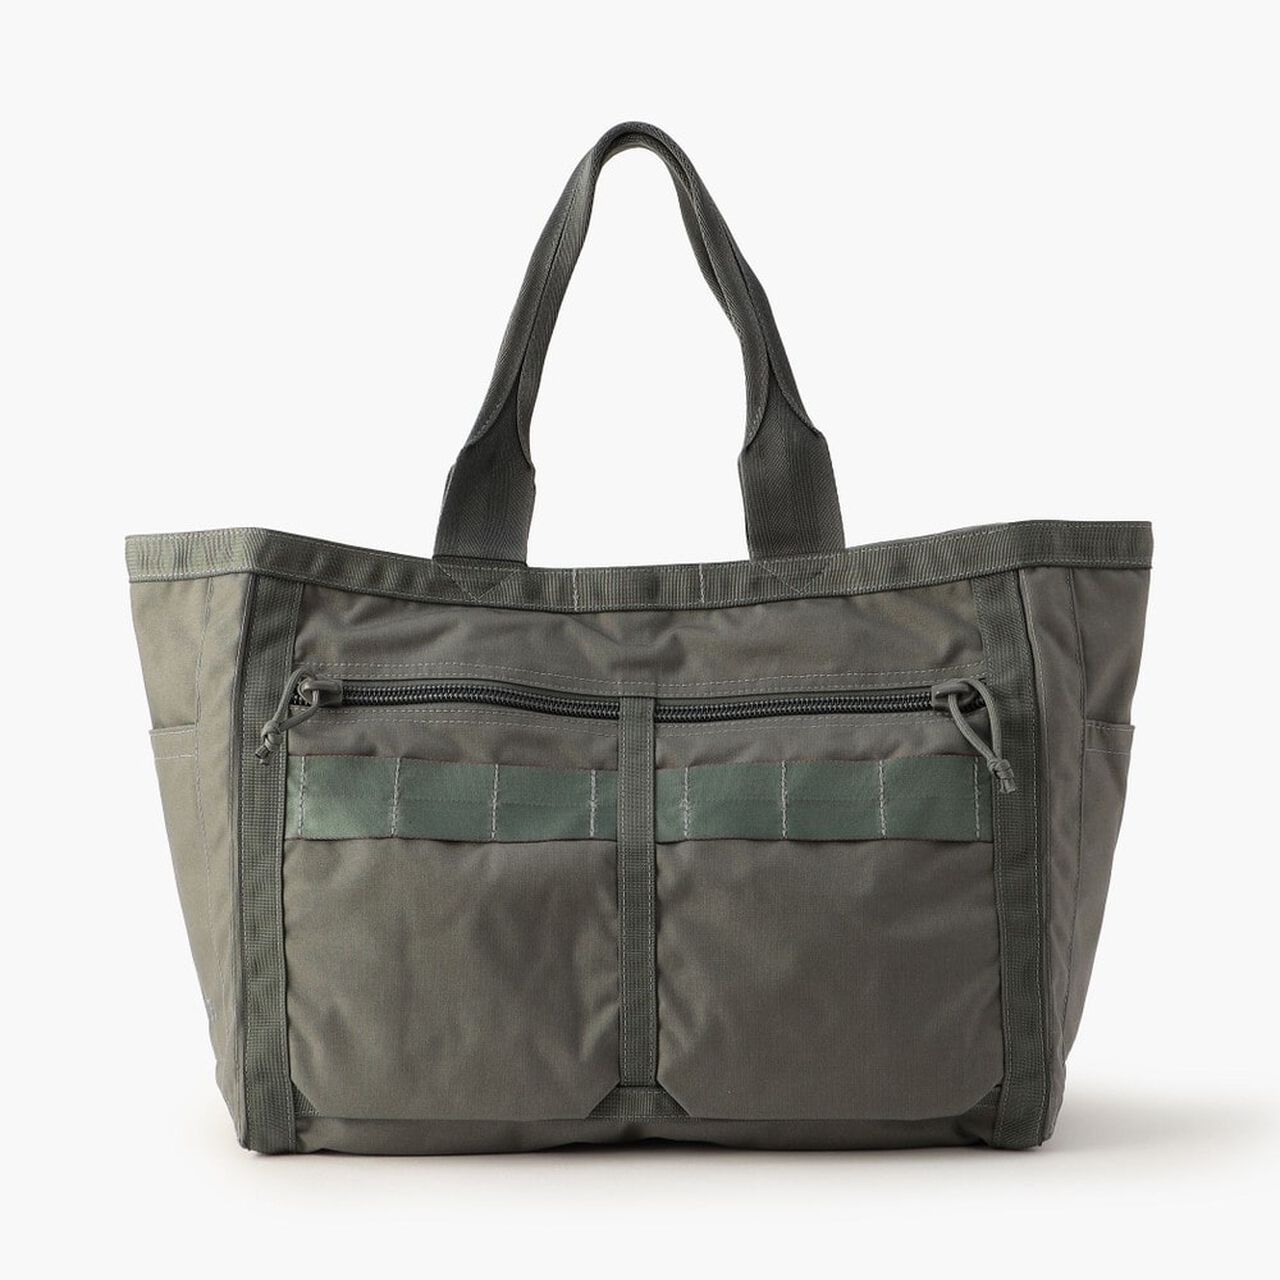 FREIGHTER ARMOR TOTE,葉綠色, large image number 0